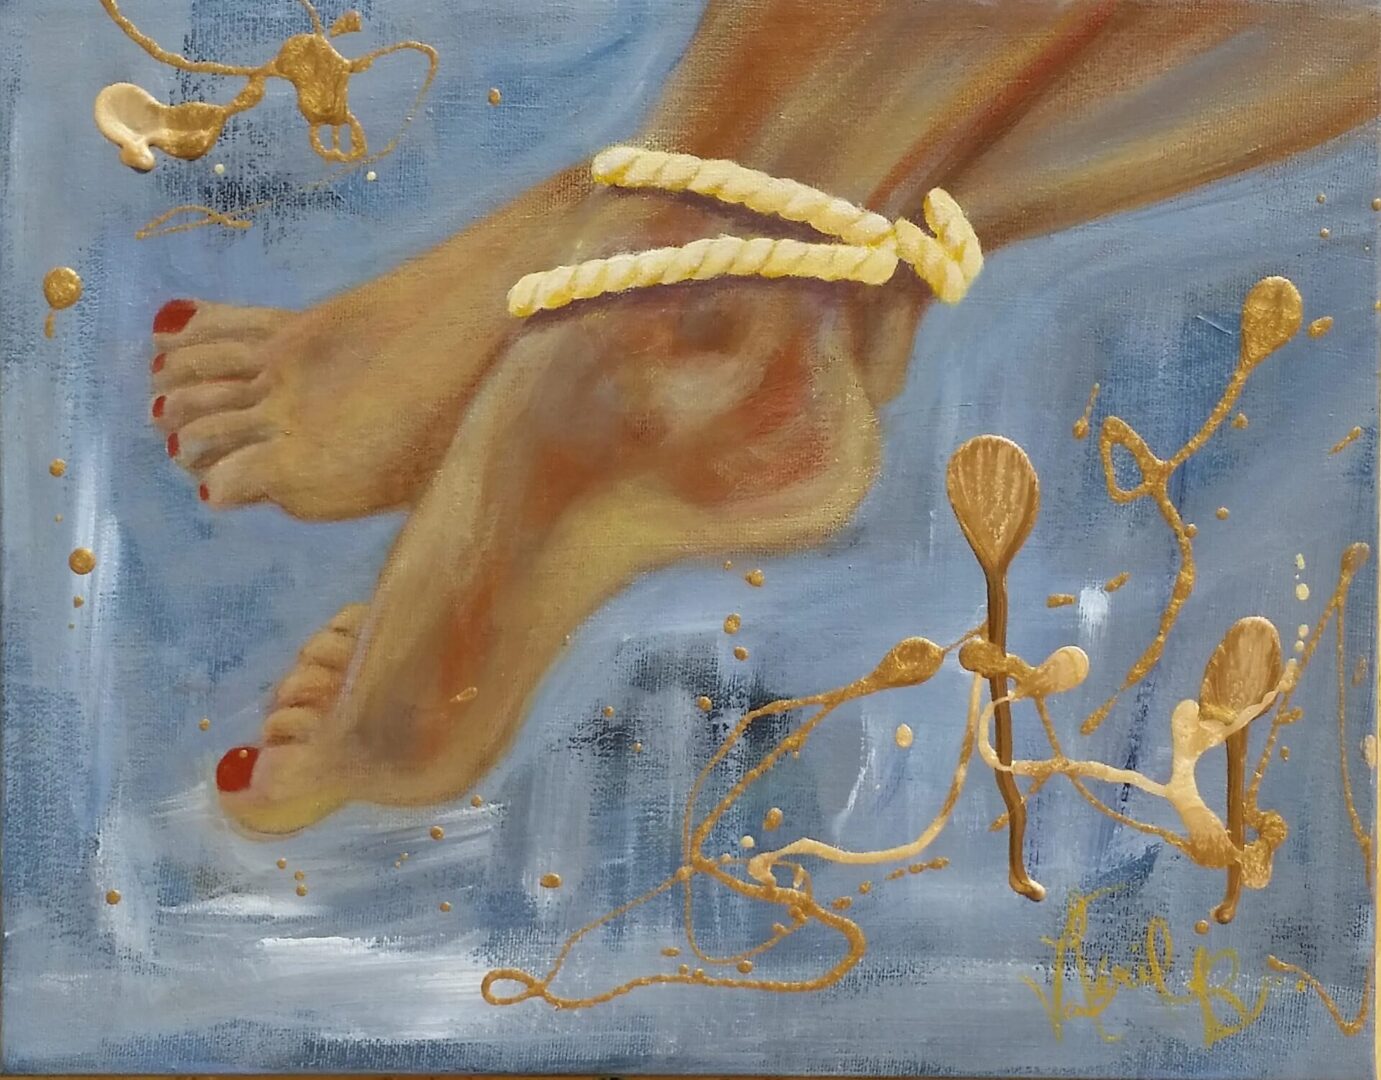 A painting of feet with yellow ropes on them.